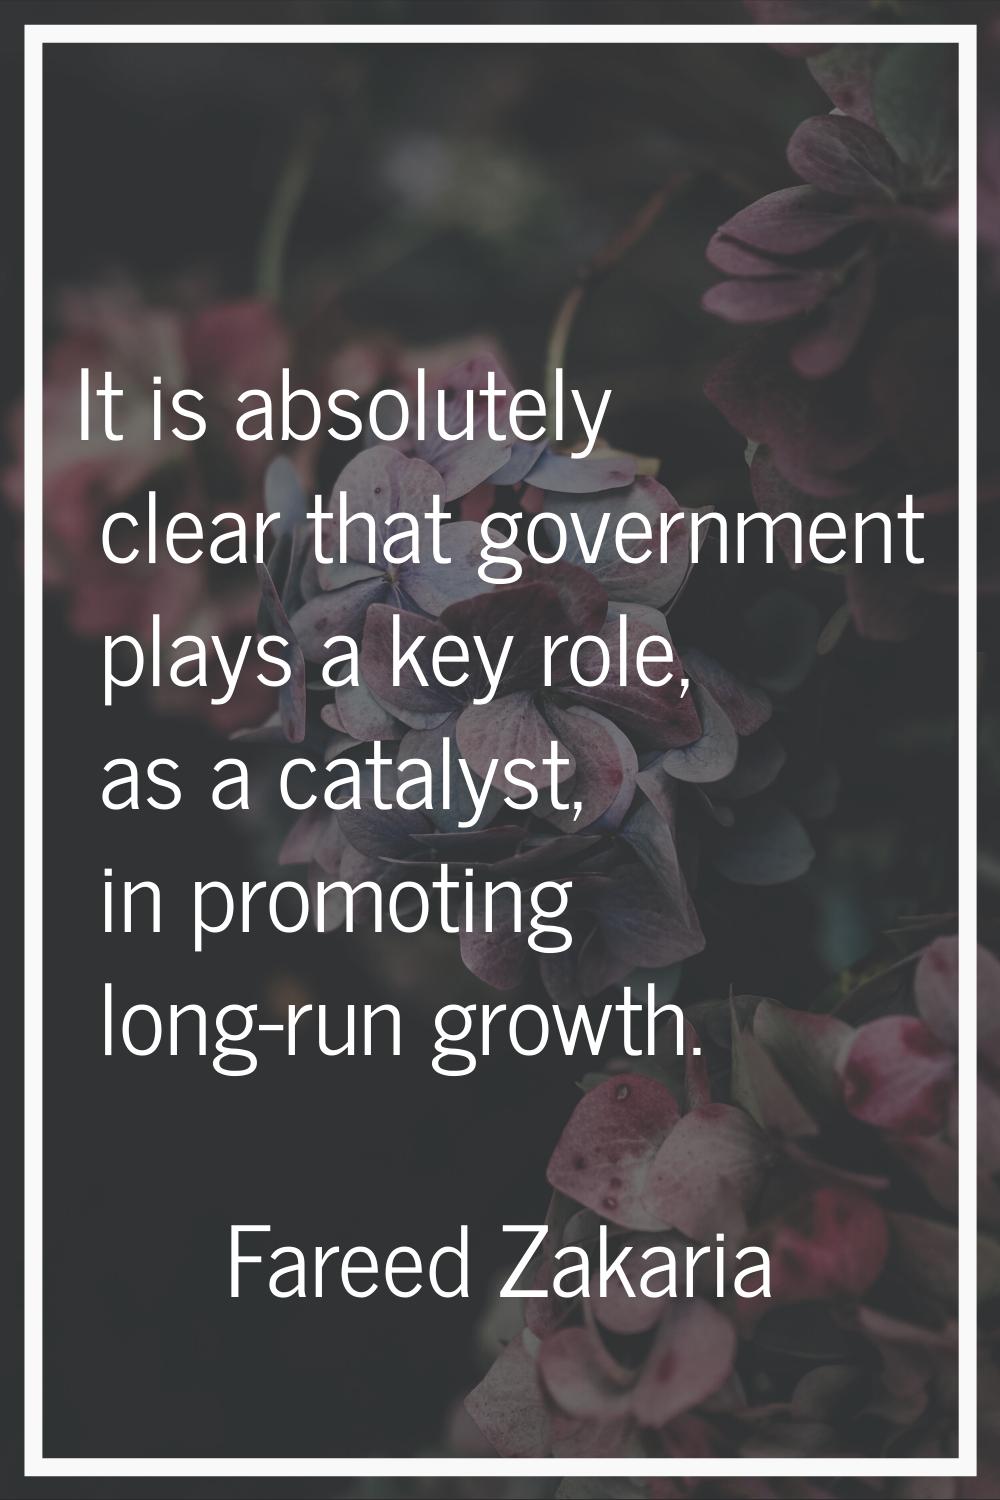 It is absolutely clear that government plays a key role, as a catalyst, in promoting long-run growt